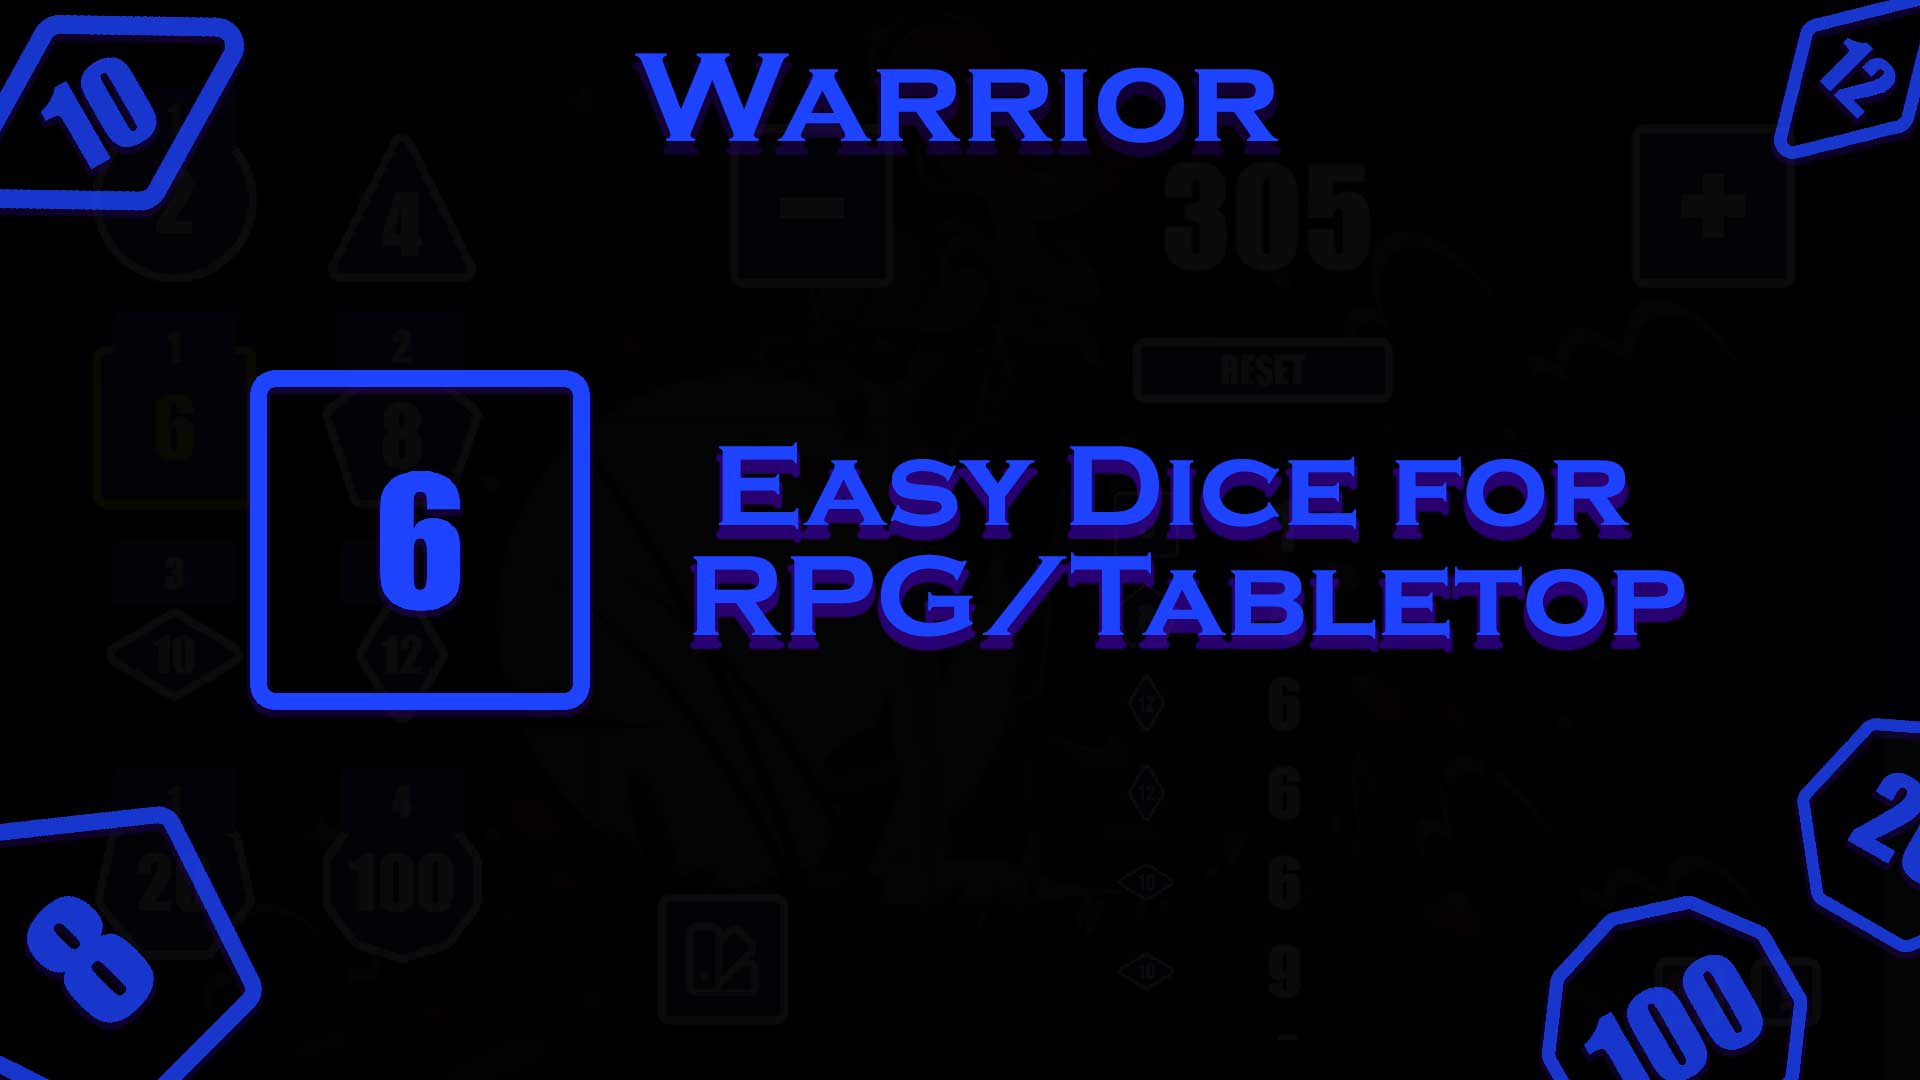 Easy Dice for RPG/Tabletop - Warrior 1